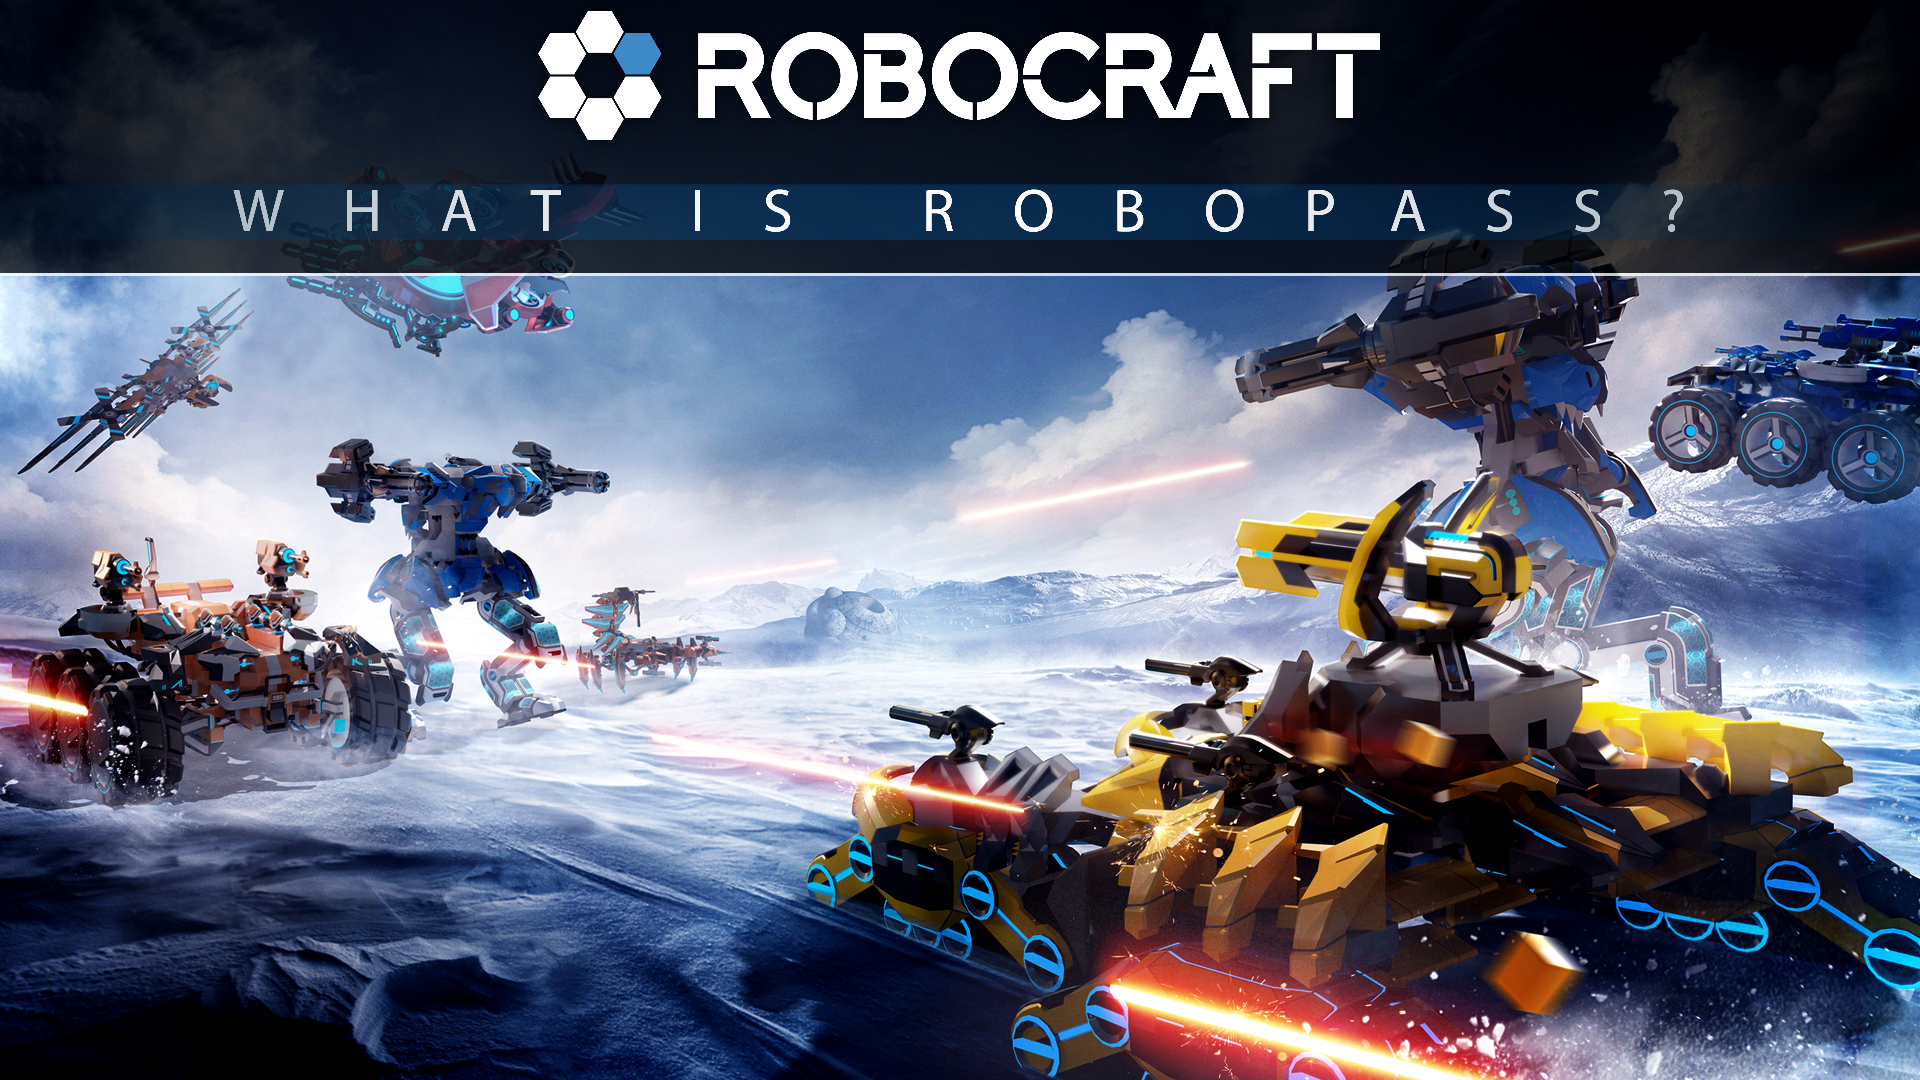 What is Robopass and Boosts? Robopass and Boosts are features that allow Battle Bot players to unlock new characters, skins, and items through gameplay or real money purchases.
Why remove Robopass and Boosts? The removal of Robopass and Boosts is part of a plan to make Battle Bot more fair and balanced for all players, regardless of their financial resources. It will also simplify the game's economy.